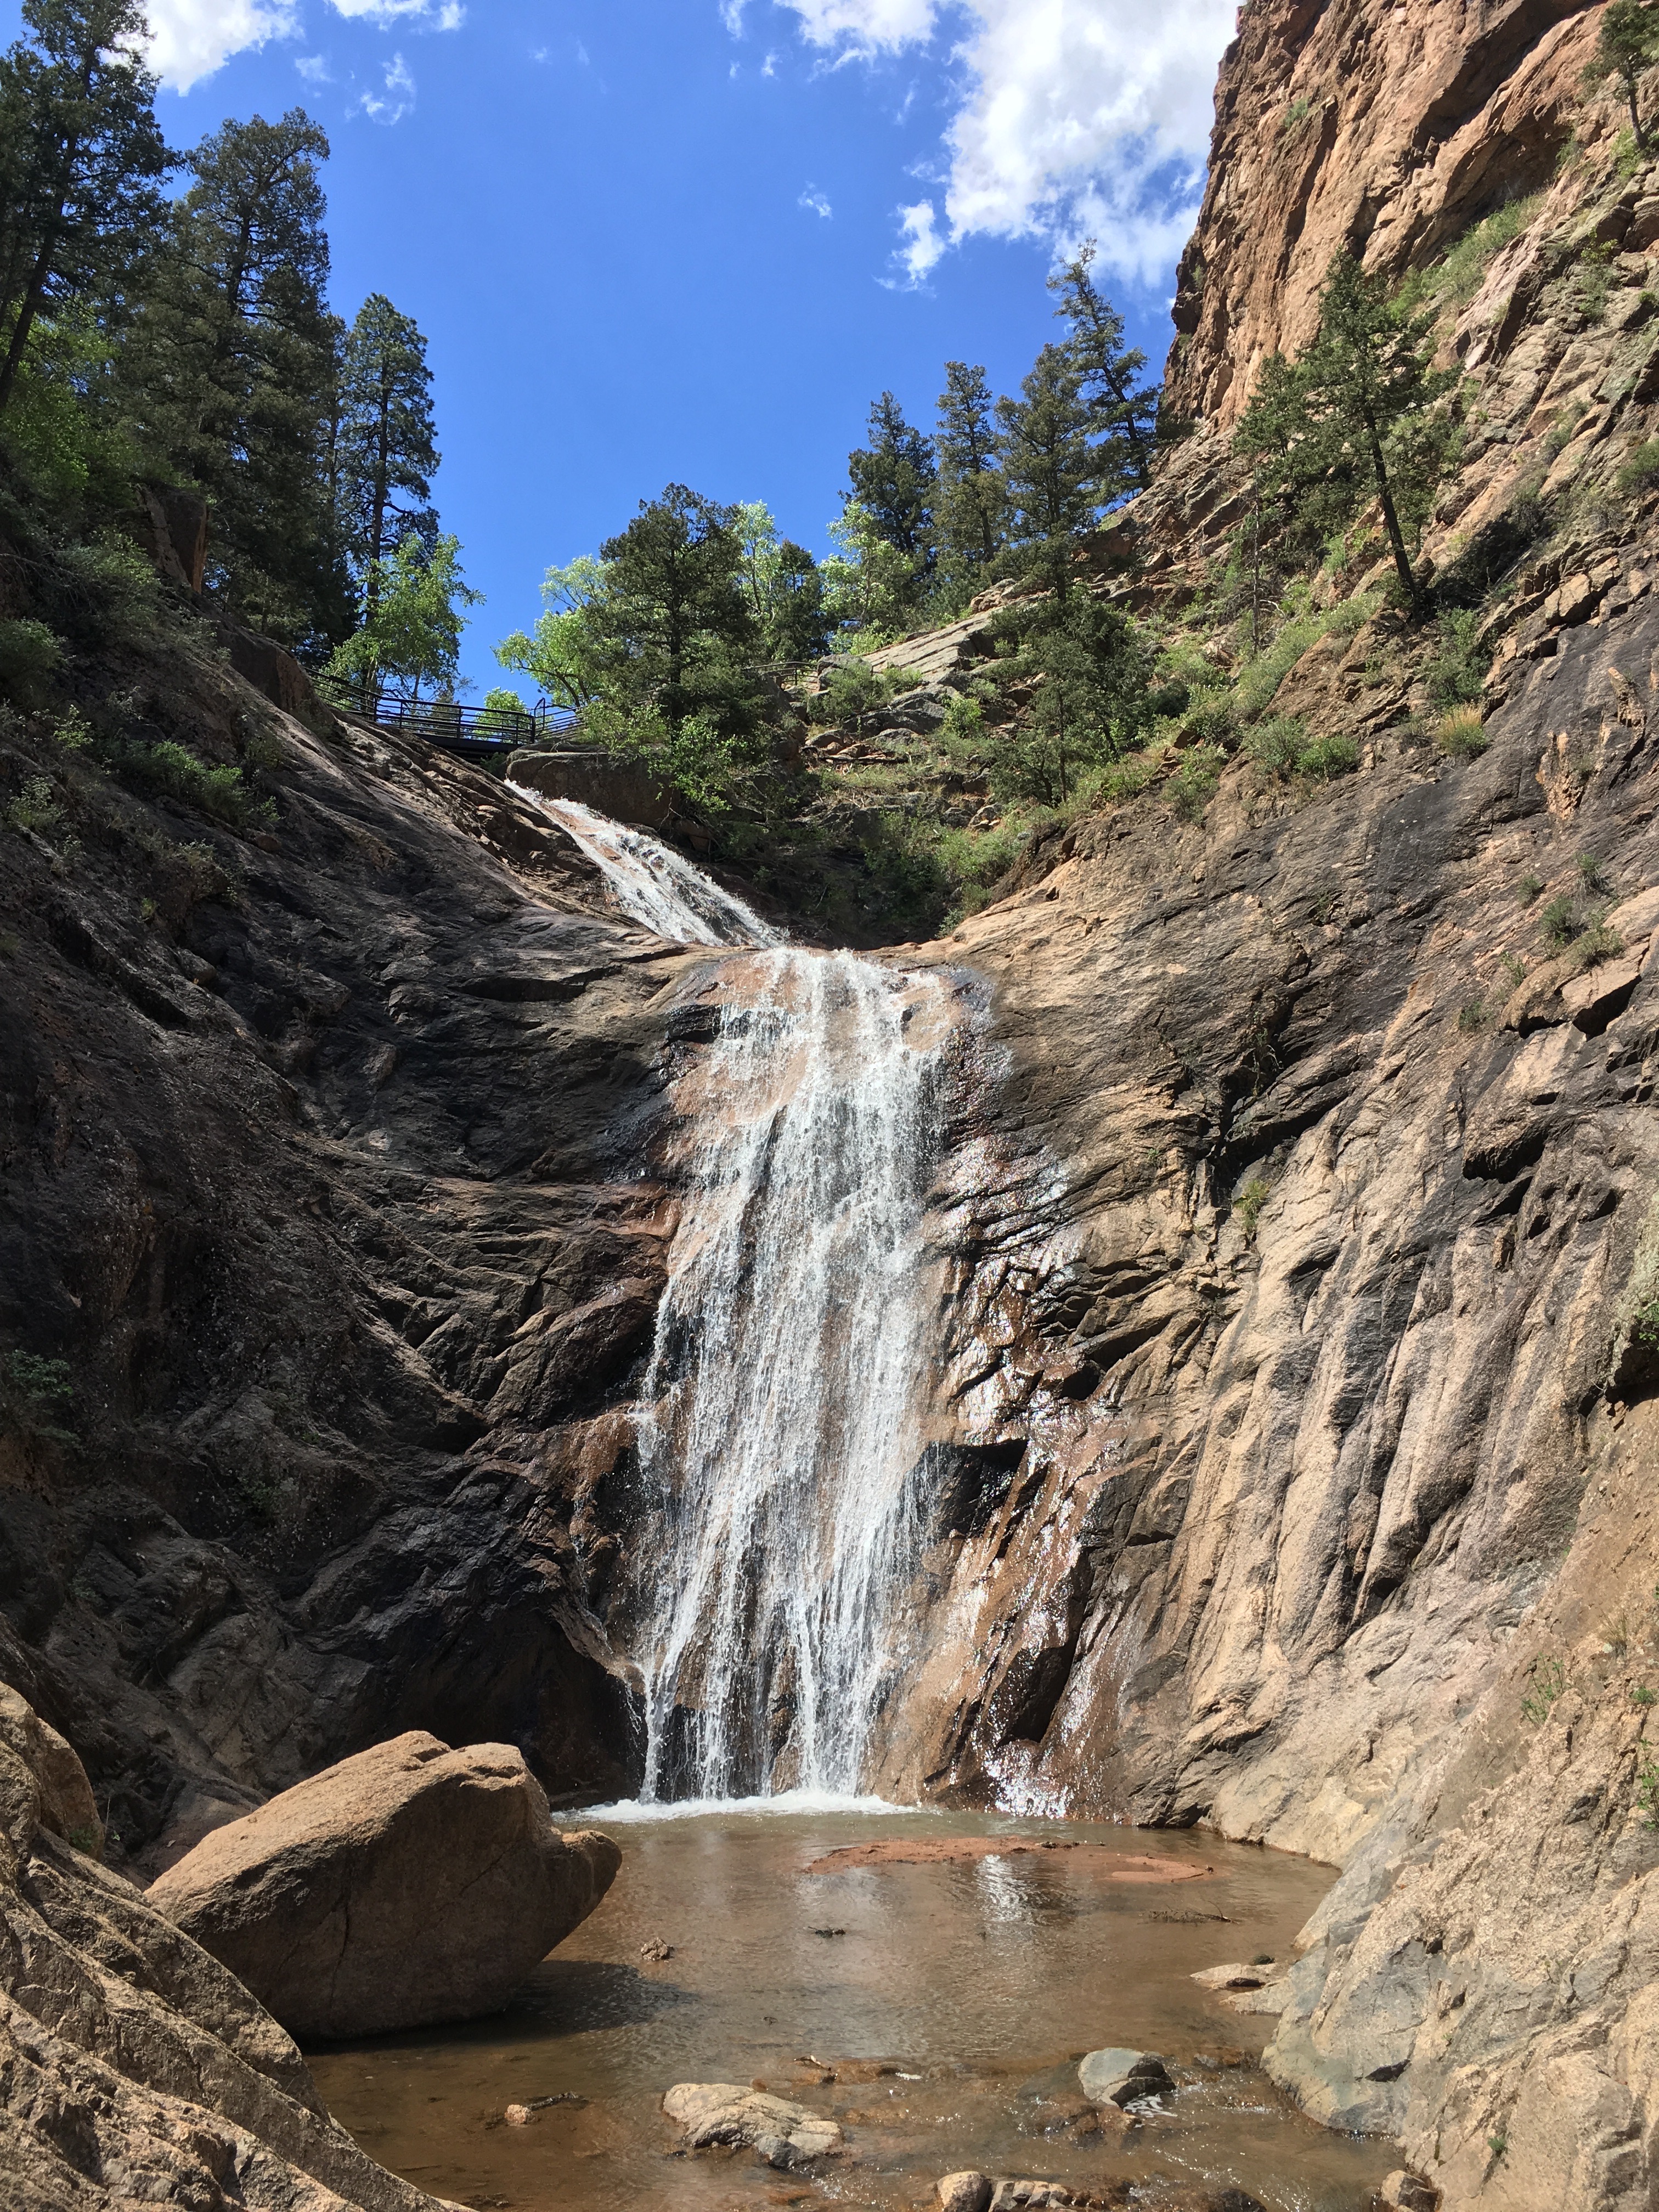 Outdoor Adventures in Colorado Springs That Can Include a Hike